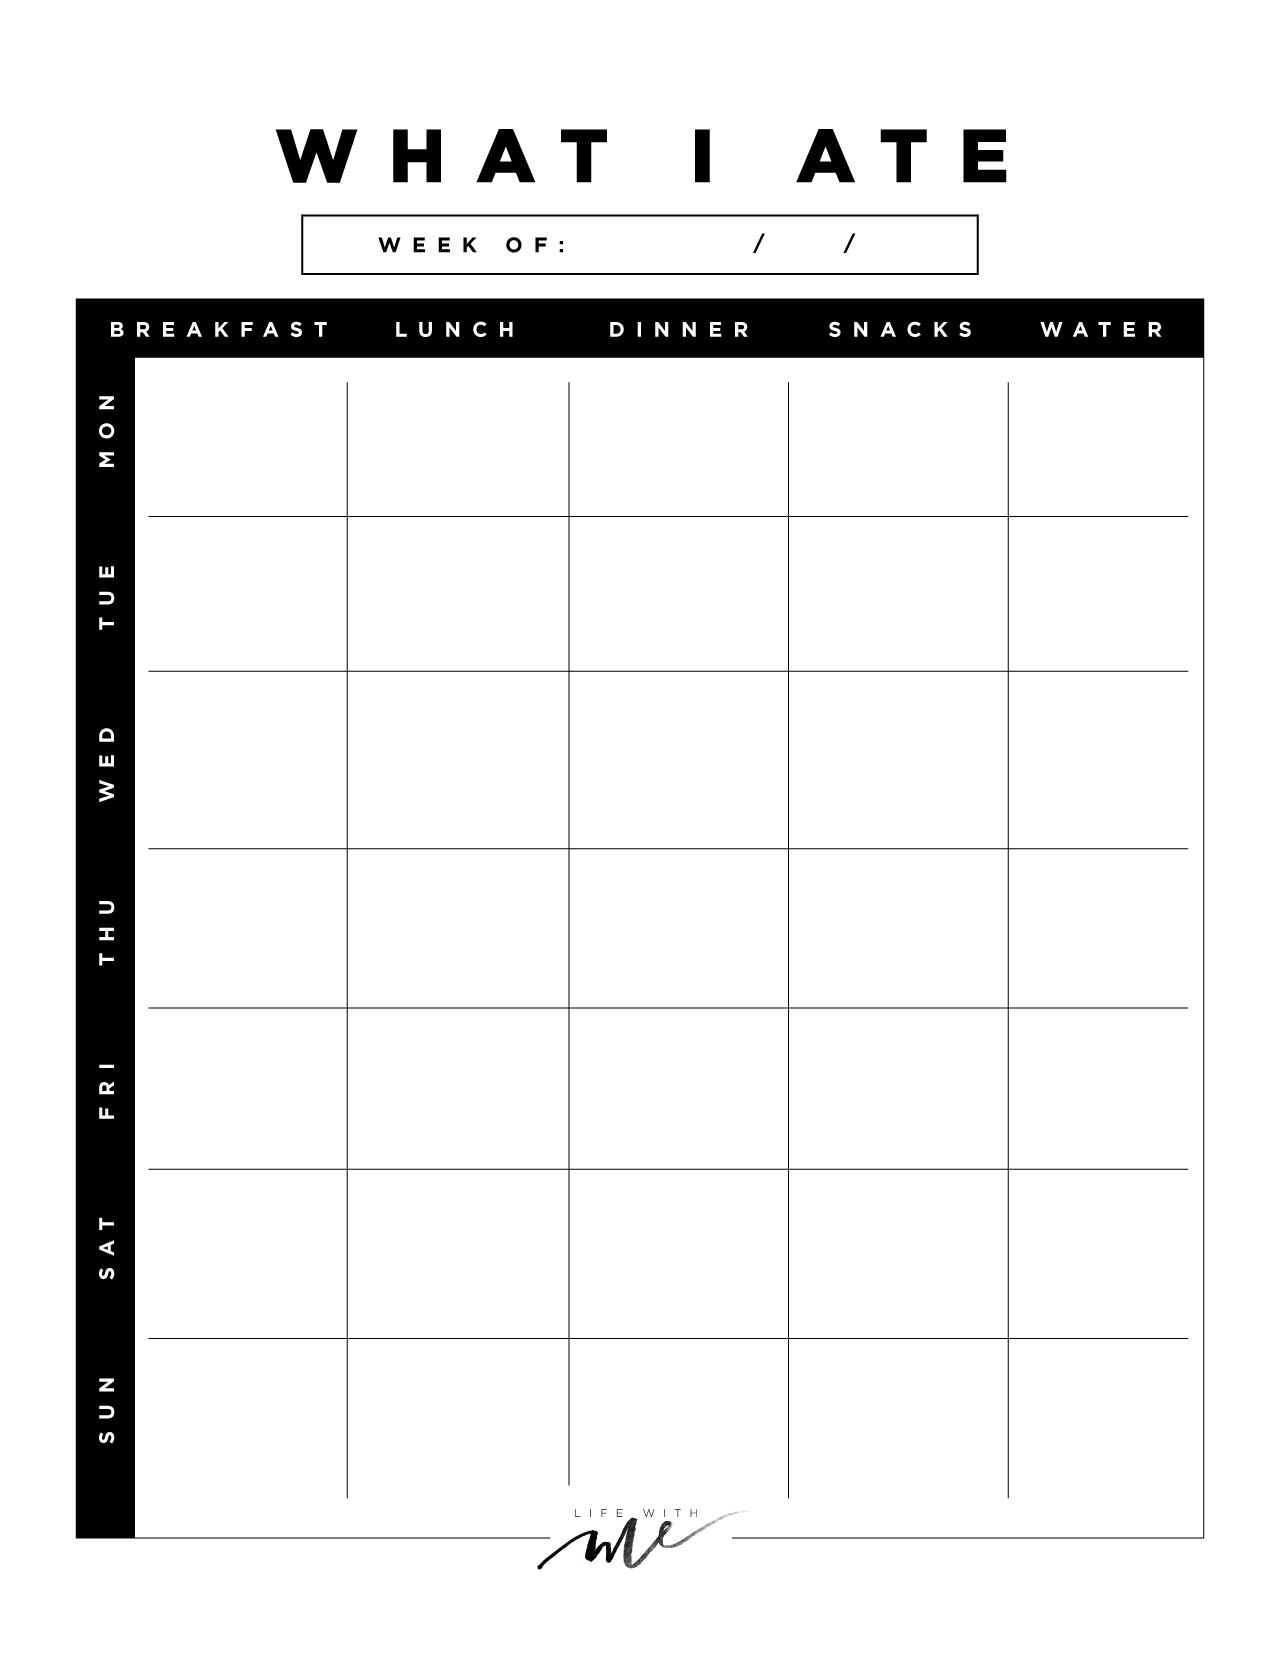 Health and Wellness Worksheets with Marianna Hewitt Free Printable Worksheet Food Log What I ate T